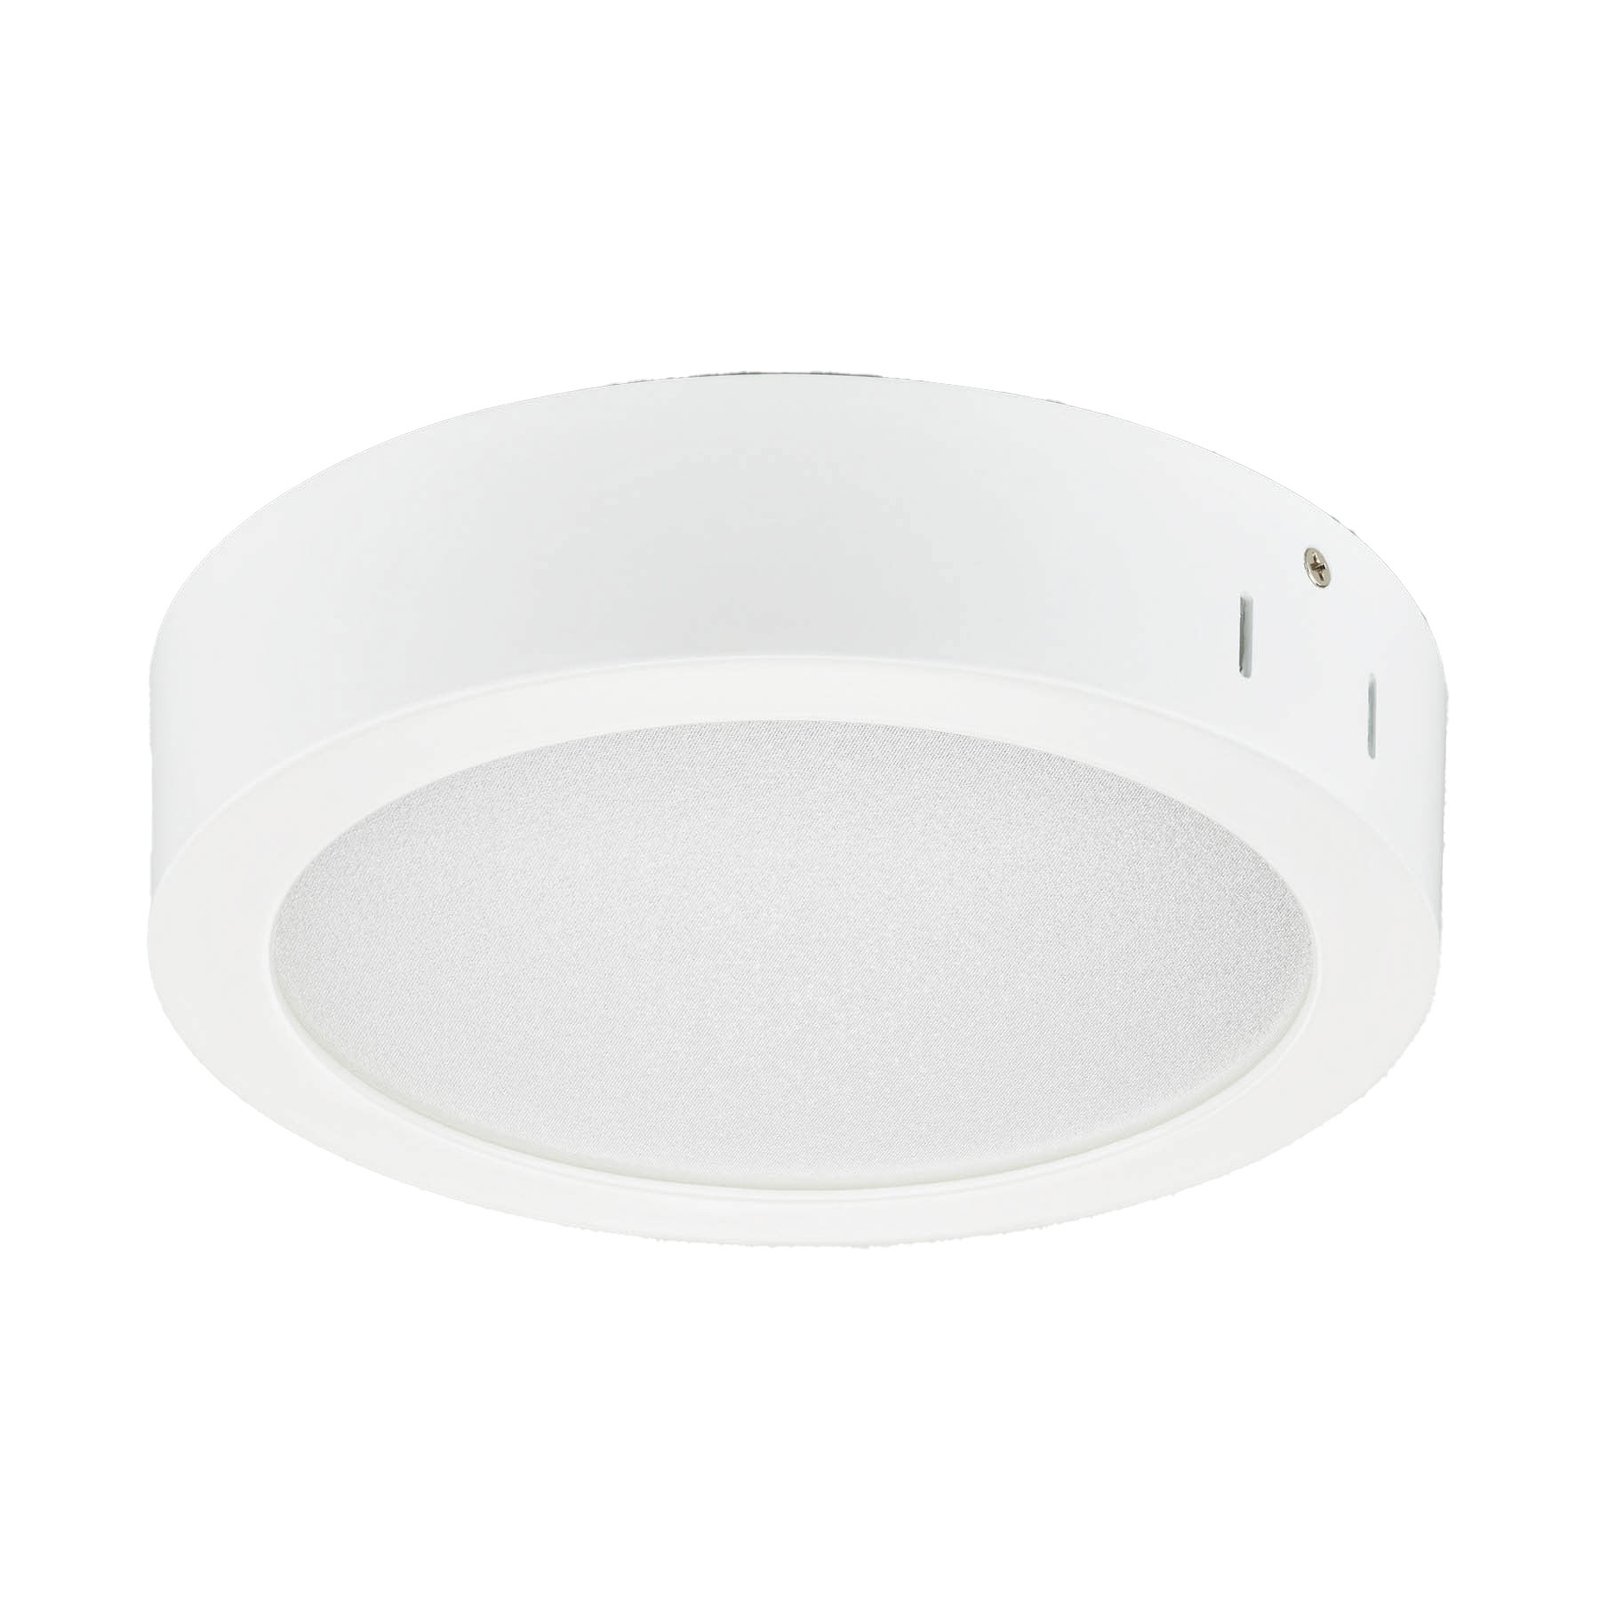 Surface-mounted LED downlight DN145C LED20S/830 PSU II WH